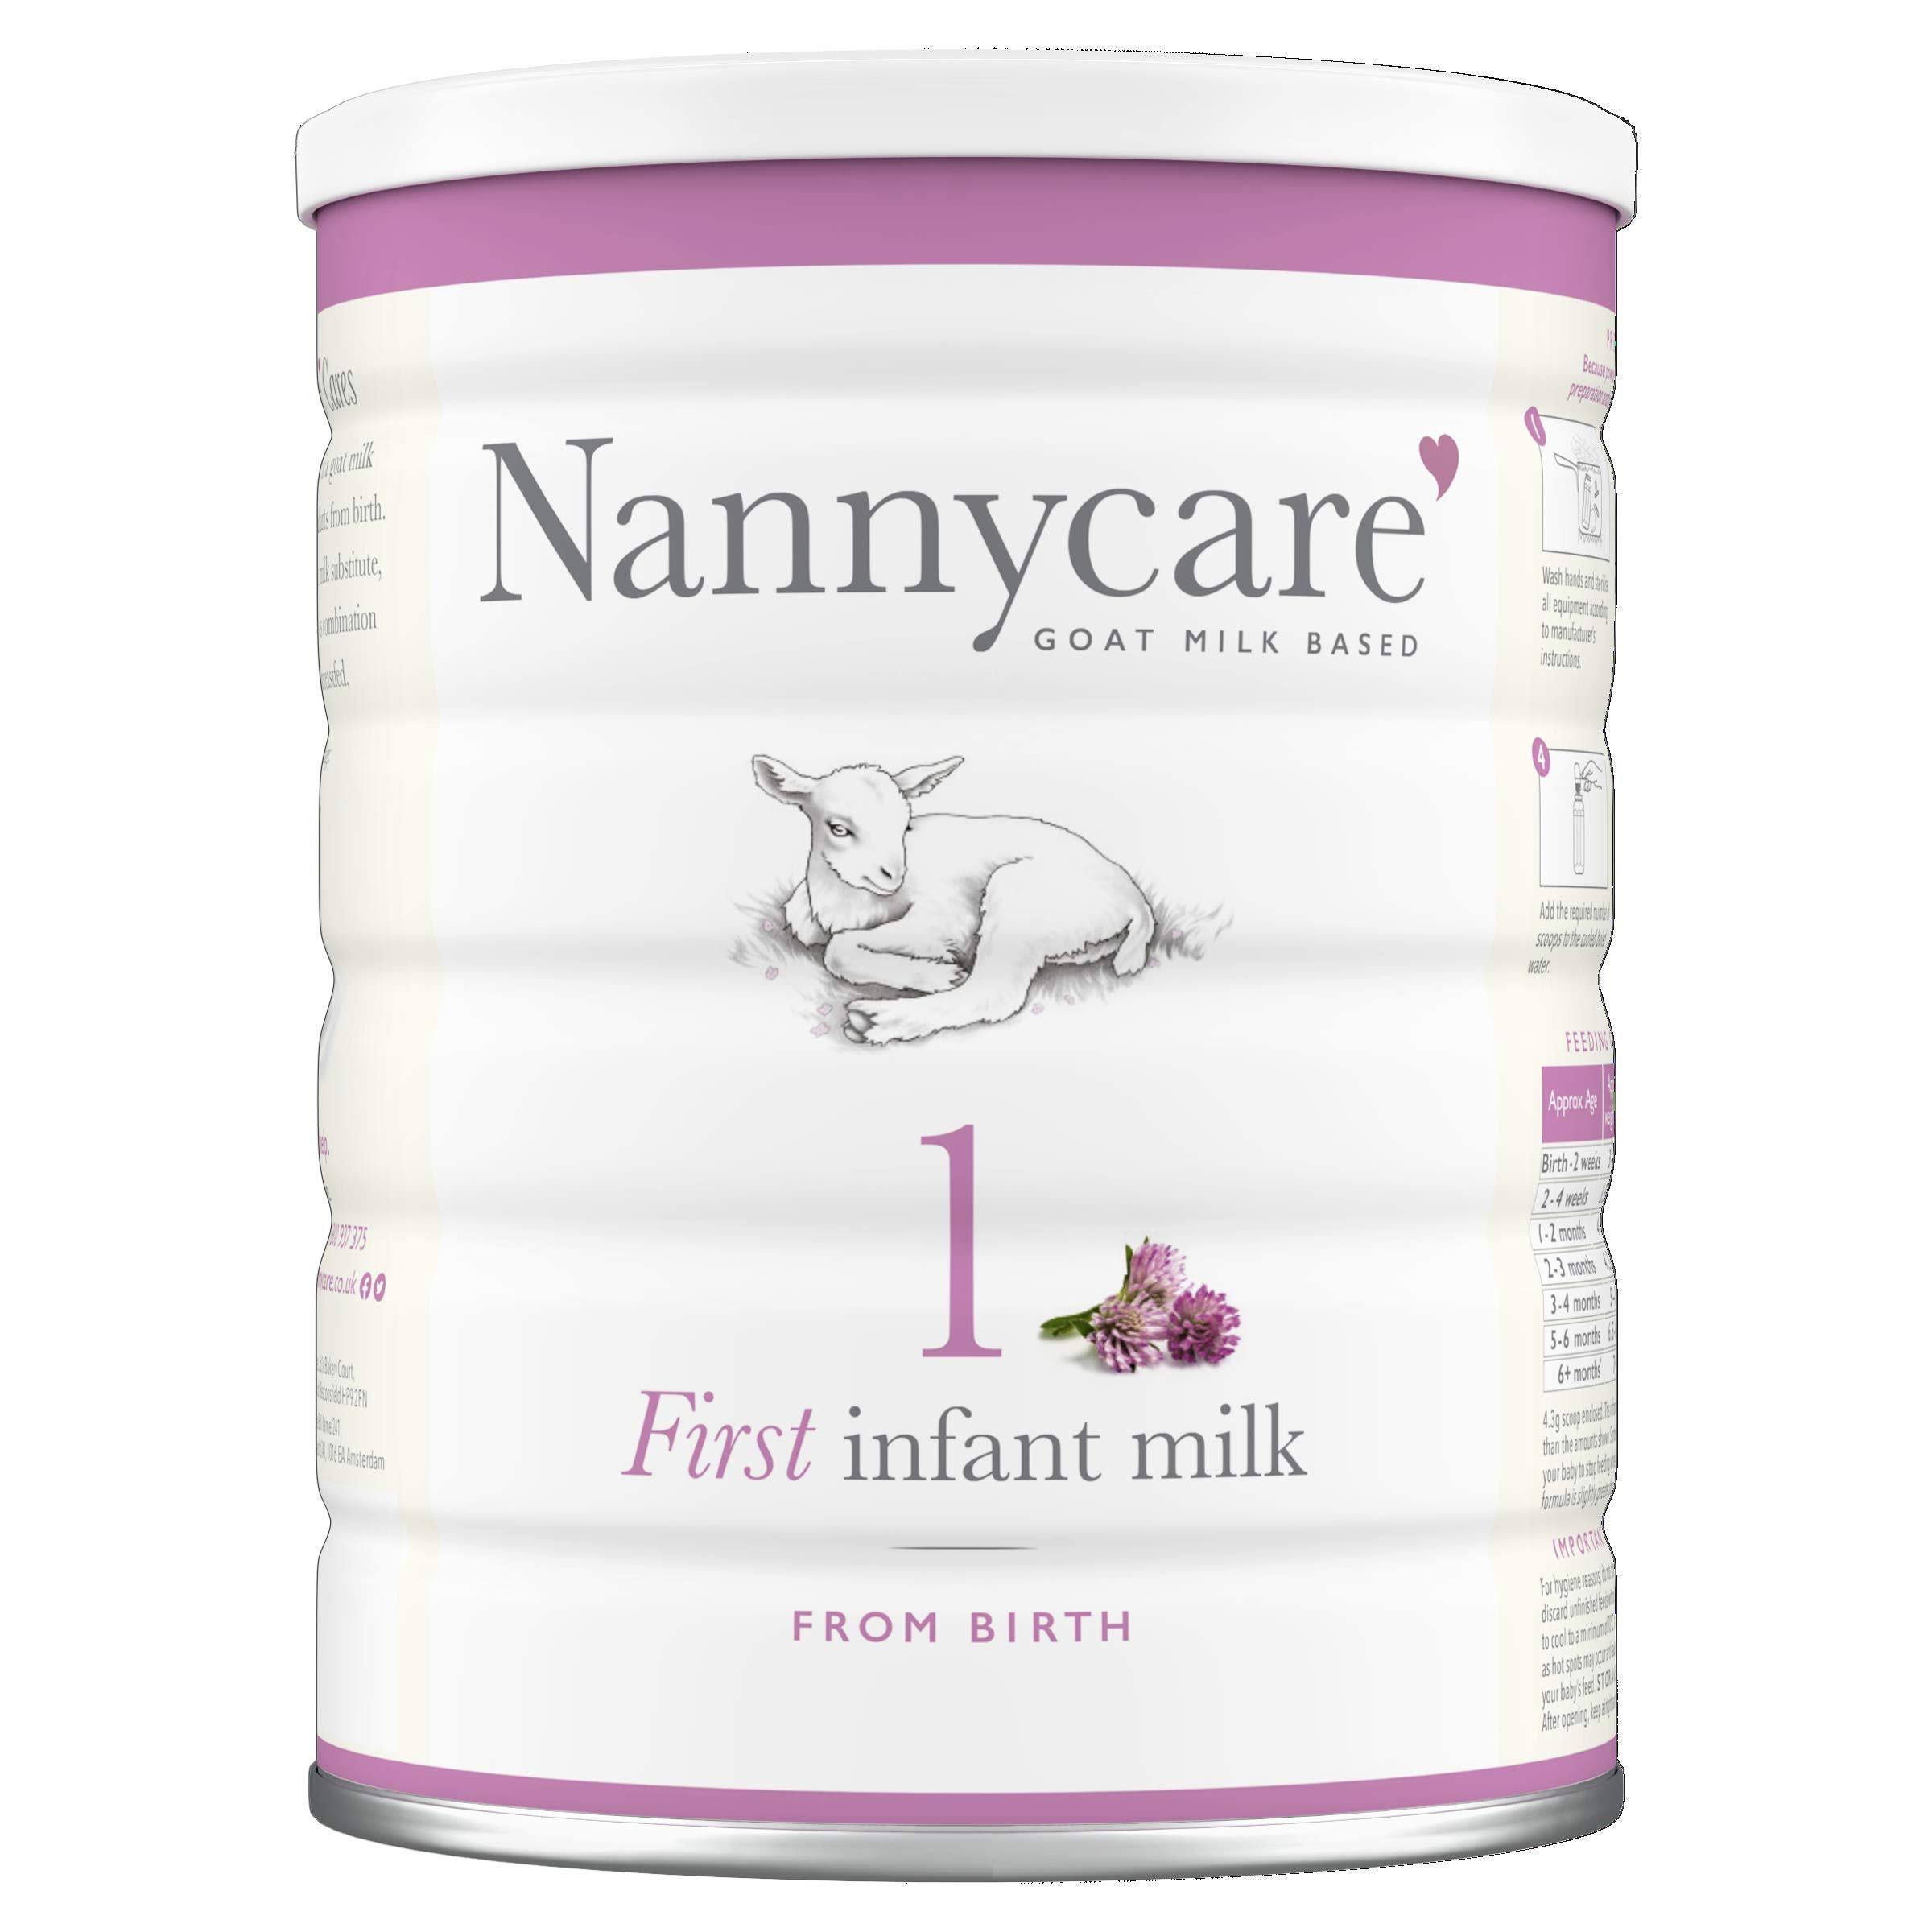 Nannycare 1 Goat Milk Based First Infant Milk from Birth 900g